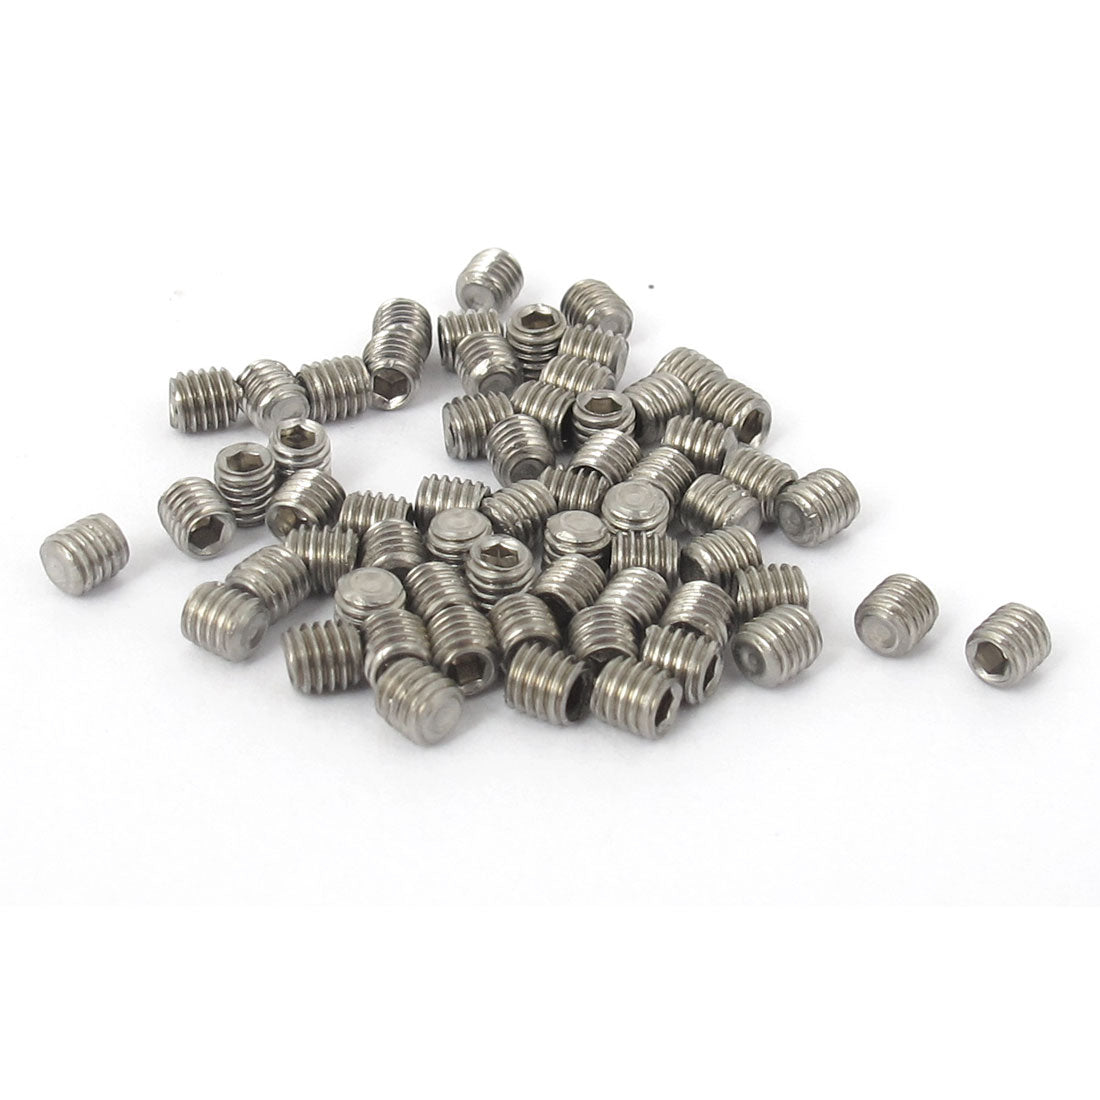 uxcell Uxcell M3x3mm Stainless Steel Hex Socket Set Cup Point Grub Screws Silver Tone 50pcs